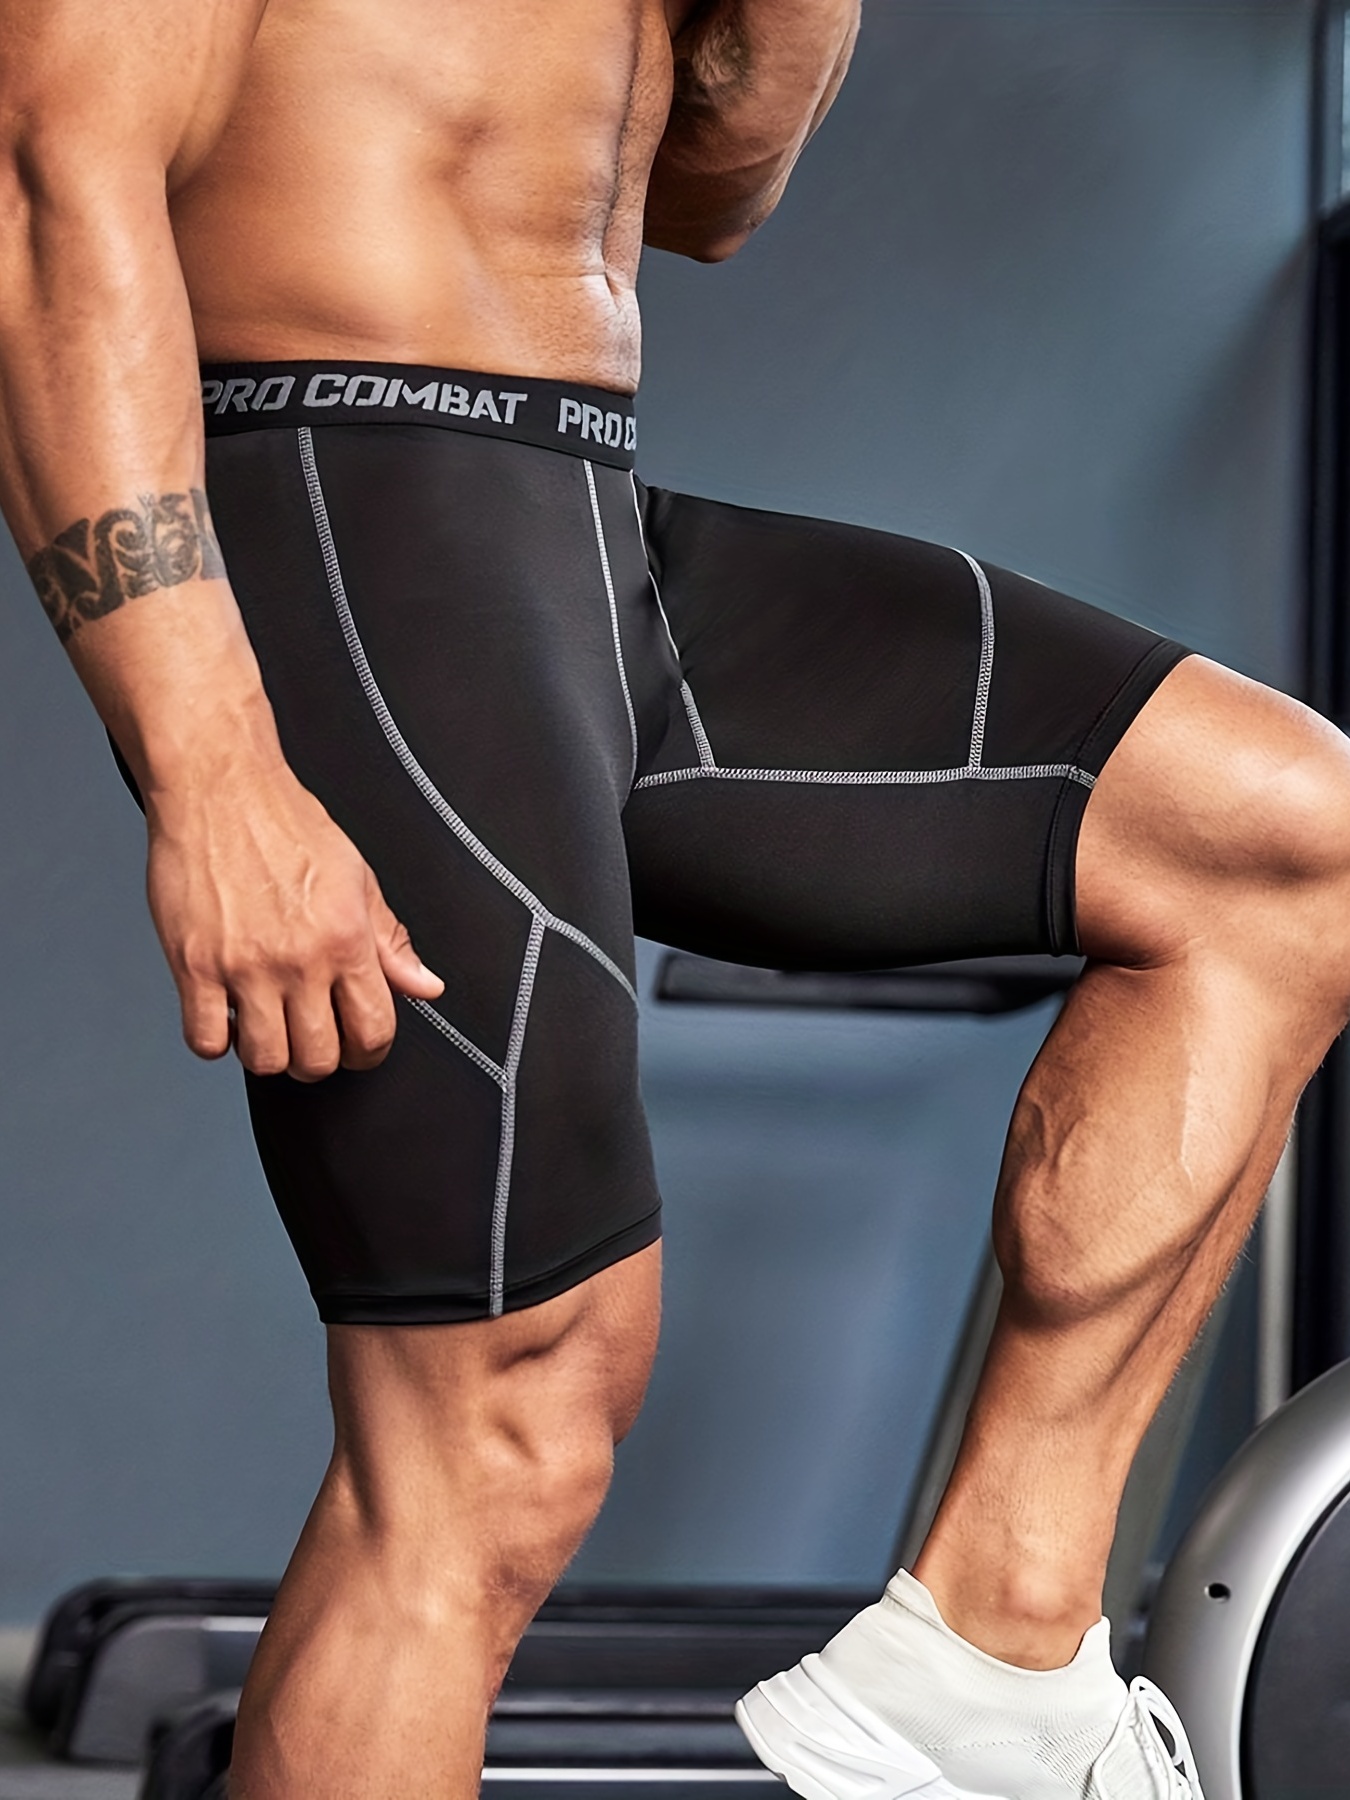 Men's Tight High Workout Shorts